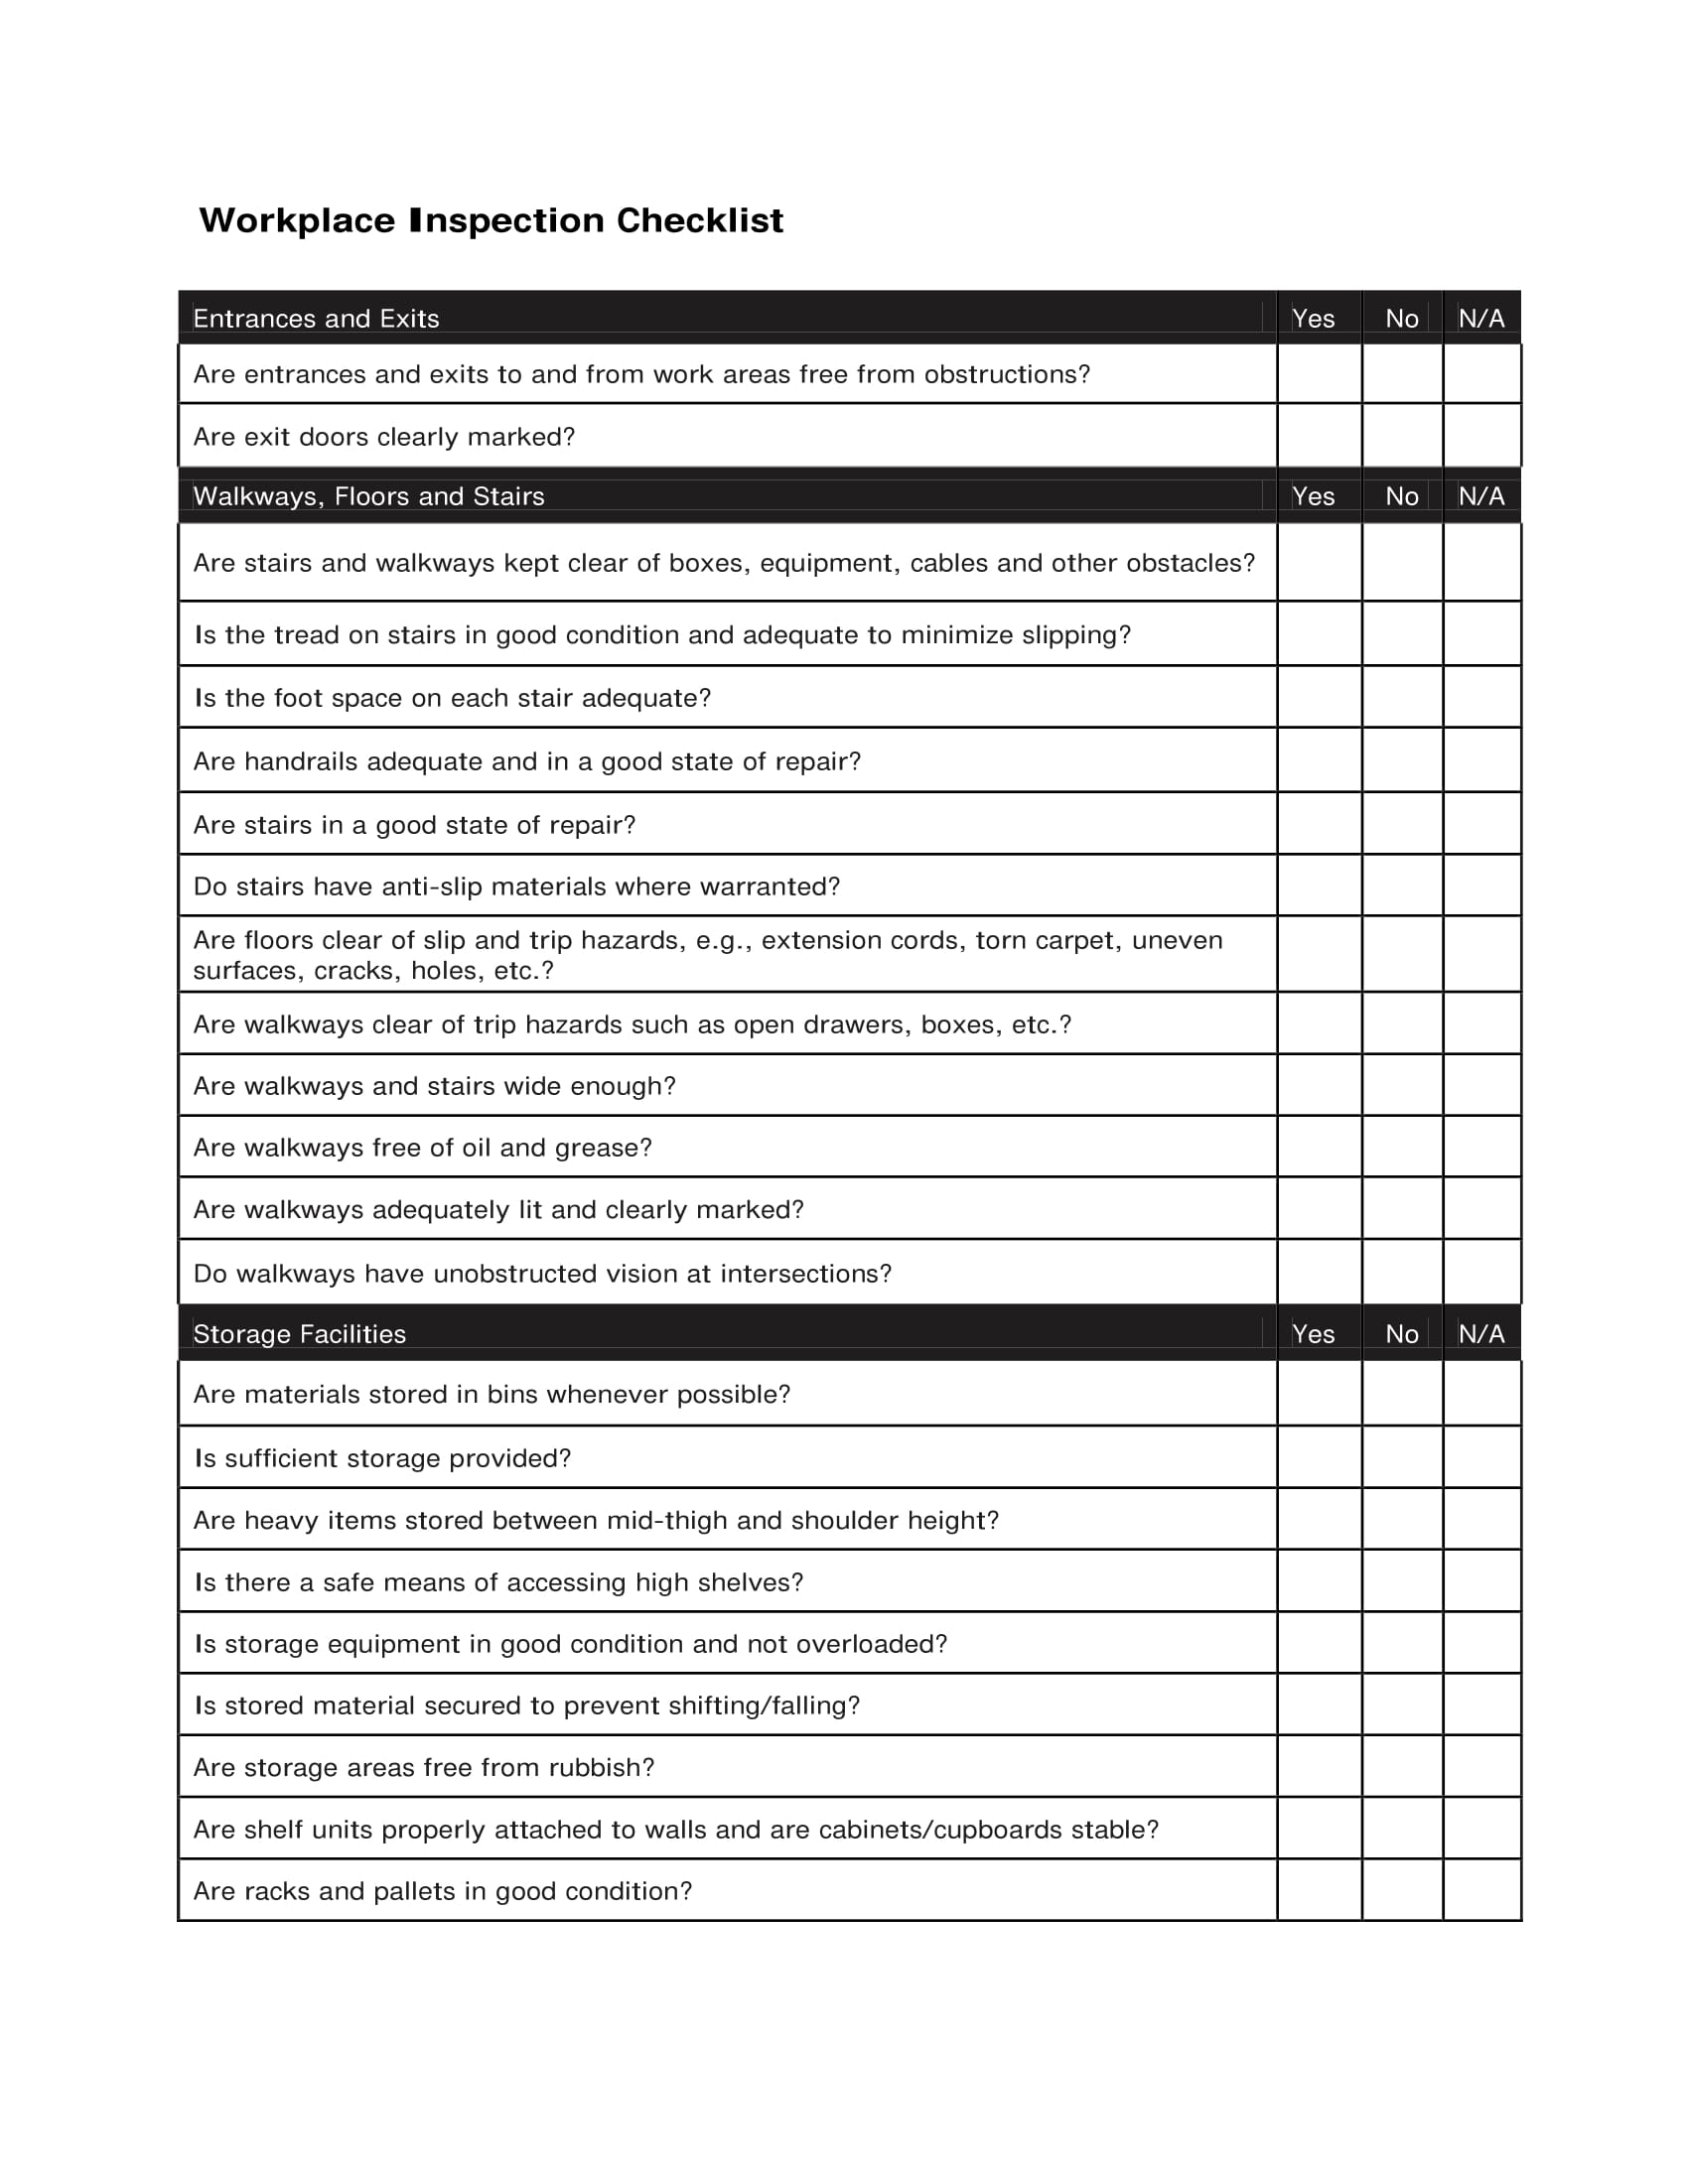 10+ Workplace Inspection Checklist Examples - PDF, Word ...